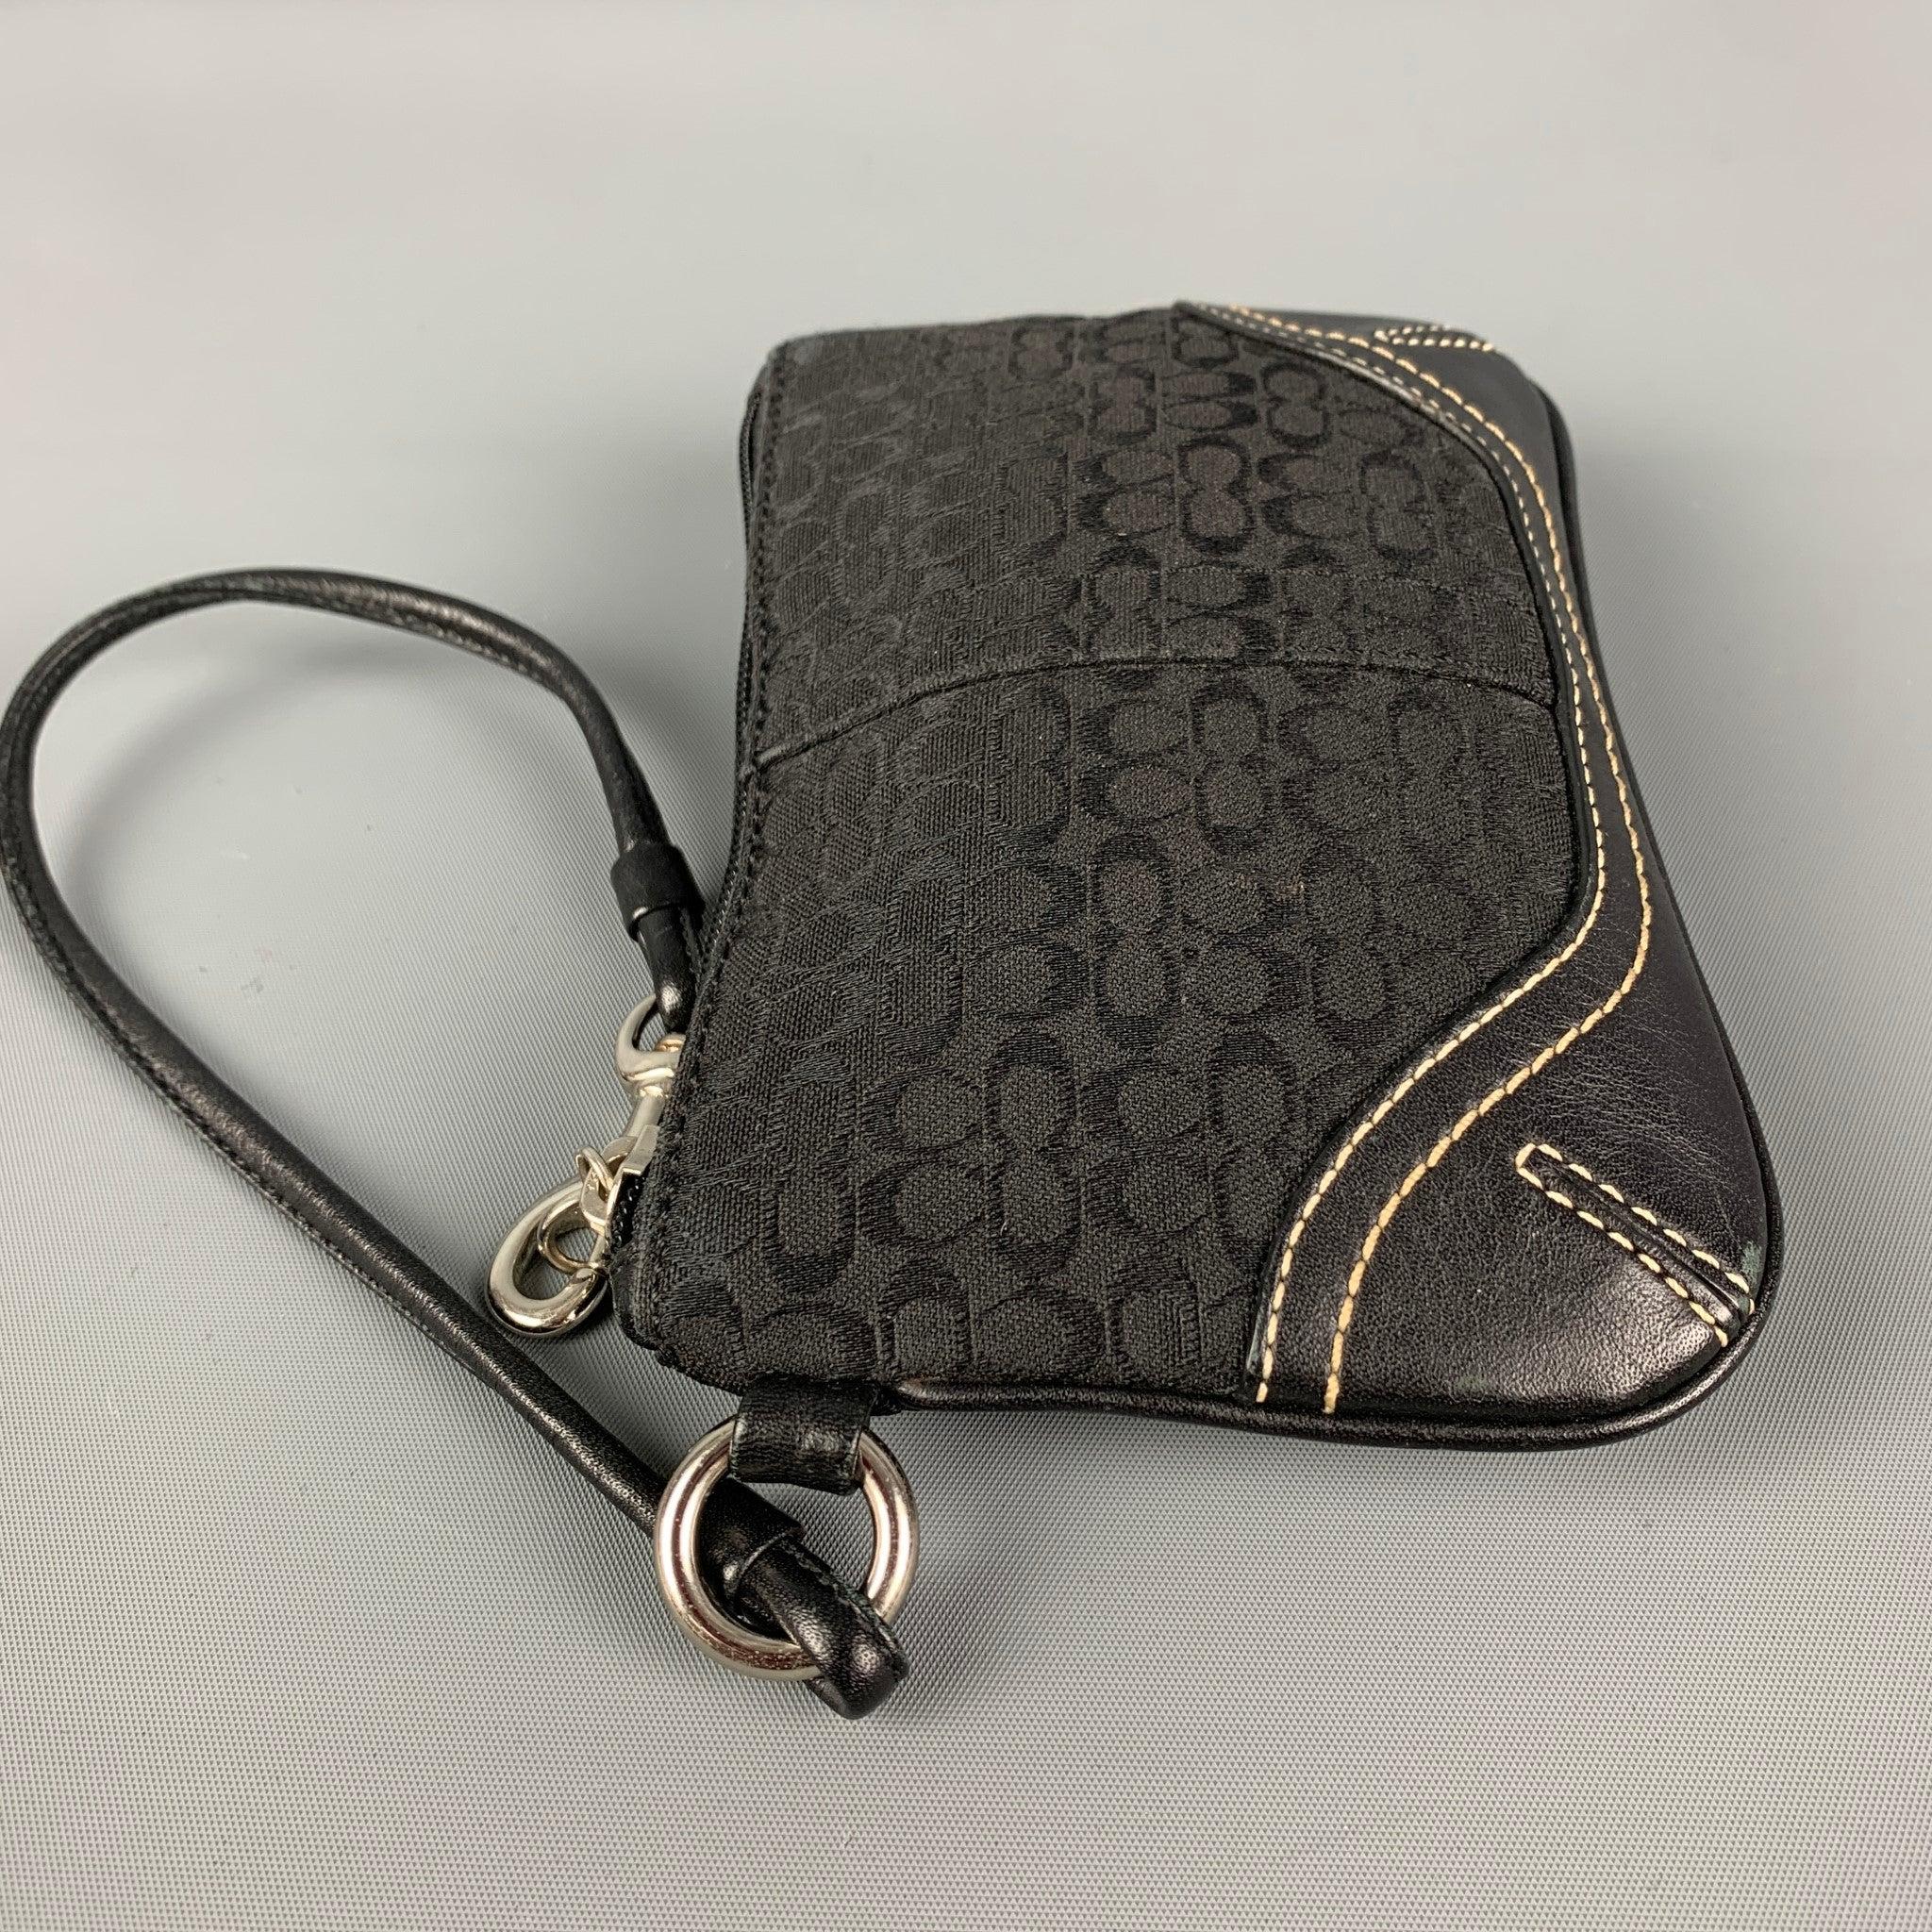 COACH wristlet comes in a black logo nylon featuring a leather trim, detachable strap, and a zipper closure.
Good
Pre-Owned Condition. 

Measurements: 
  Length: 6.25 inches  Height:
4 inches 
  
  
 
Reference: 120109
Category: Handbag & Leather